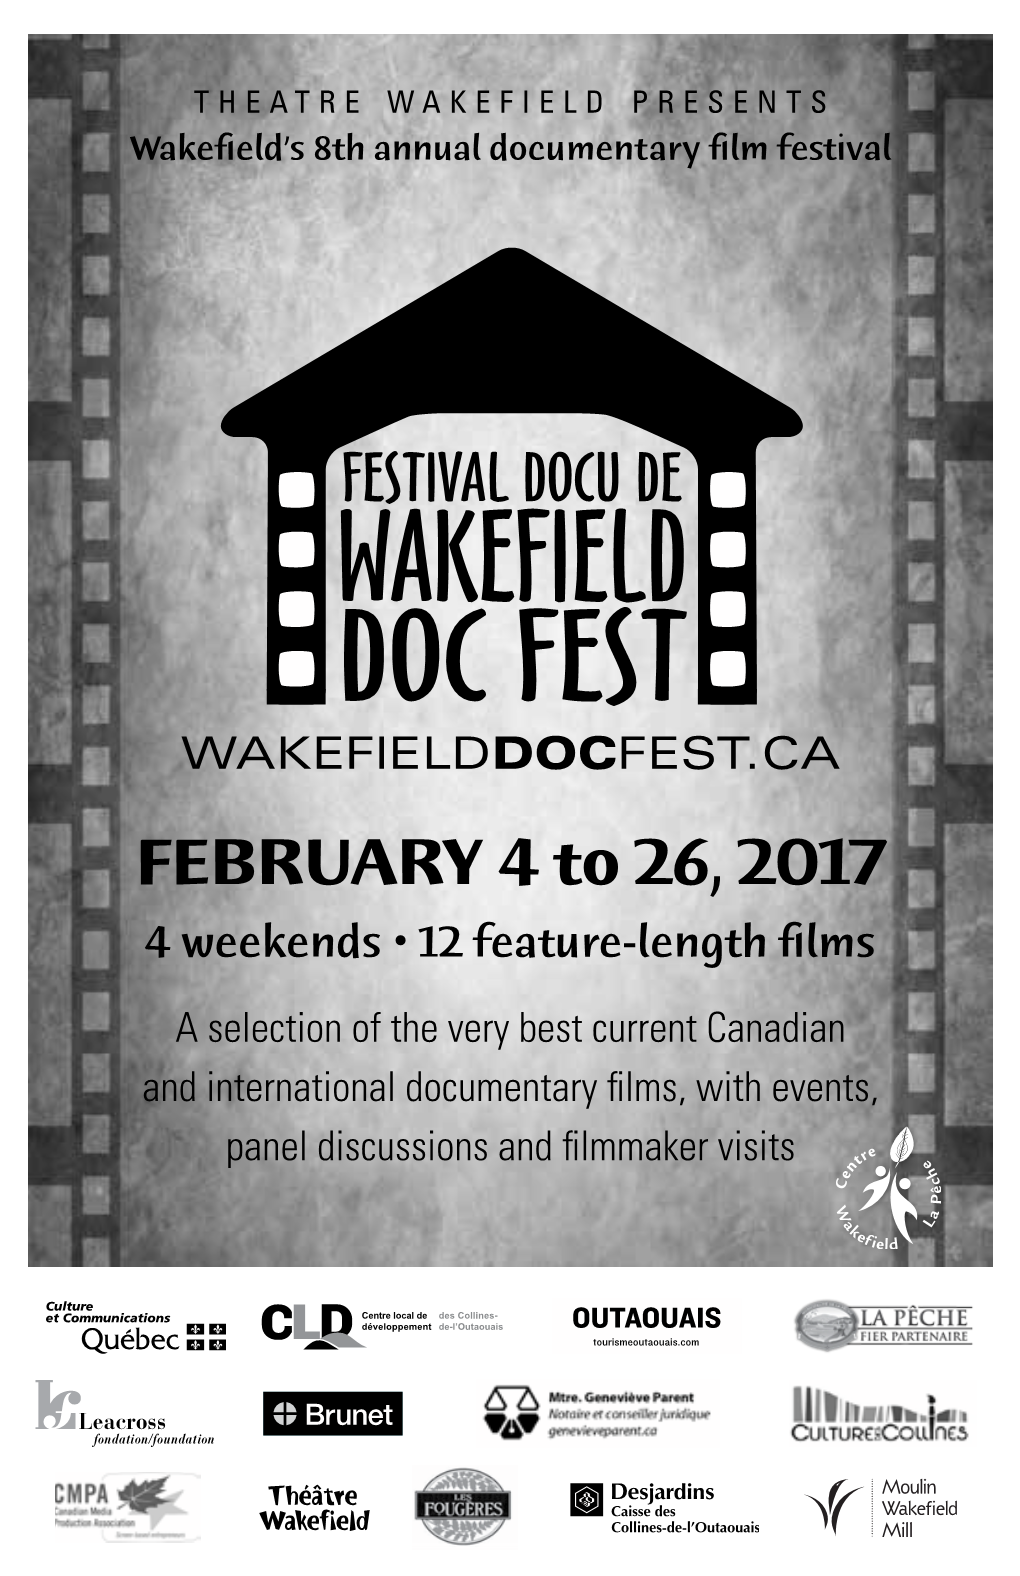 FEBRUARY 4 to 26, 2017 4 Weekends • 12 Feature-Length Films